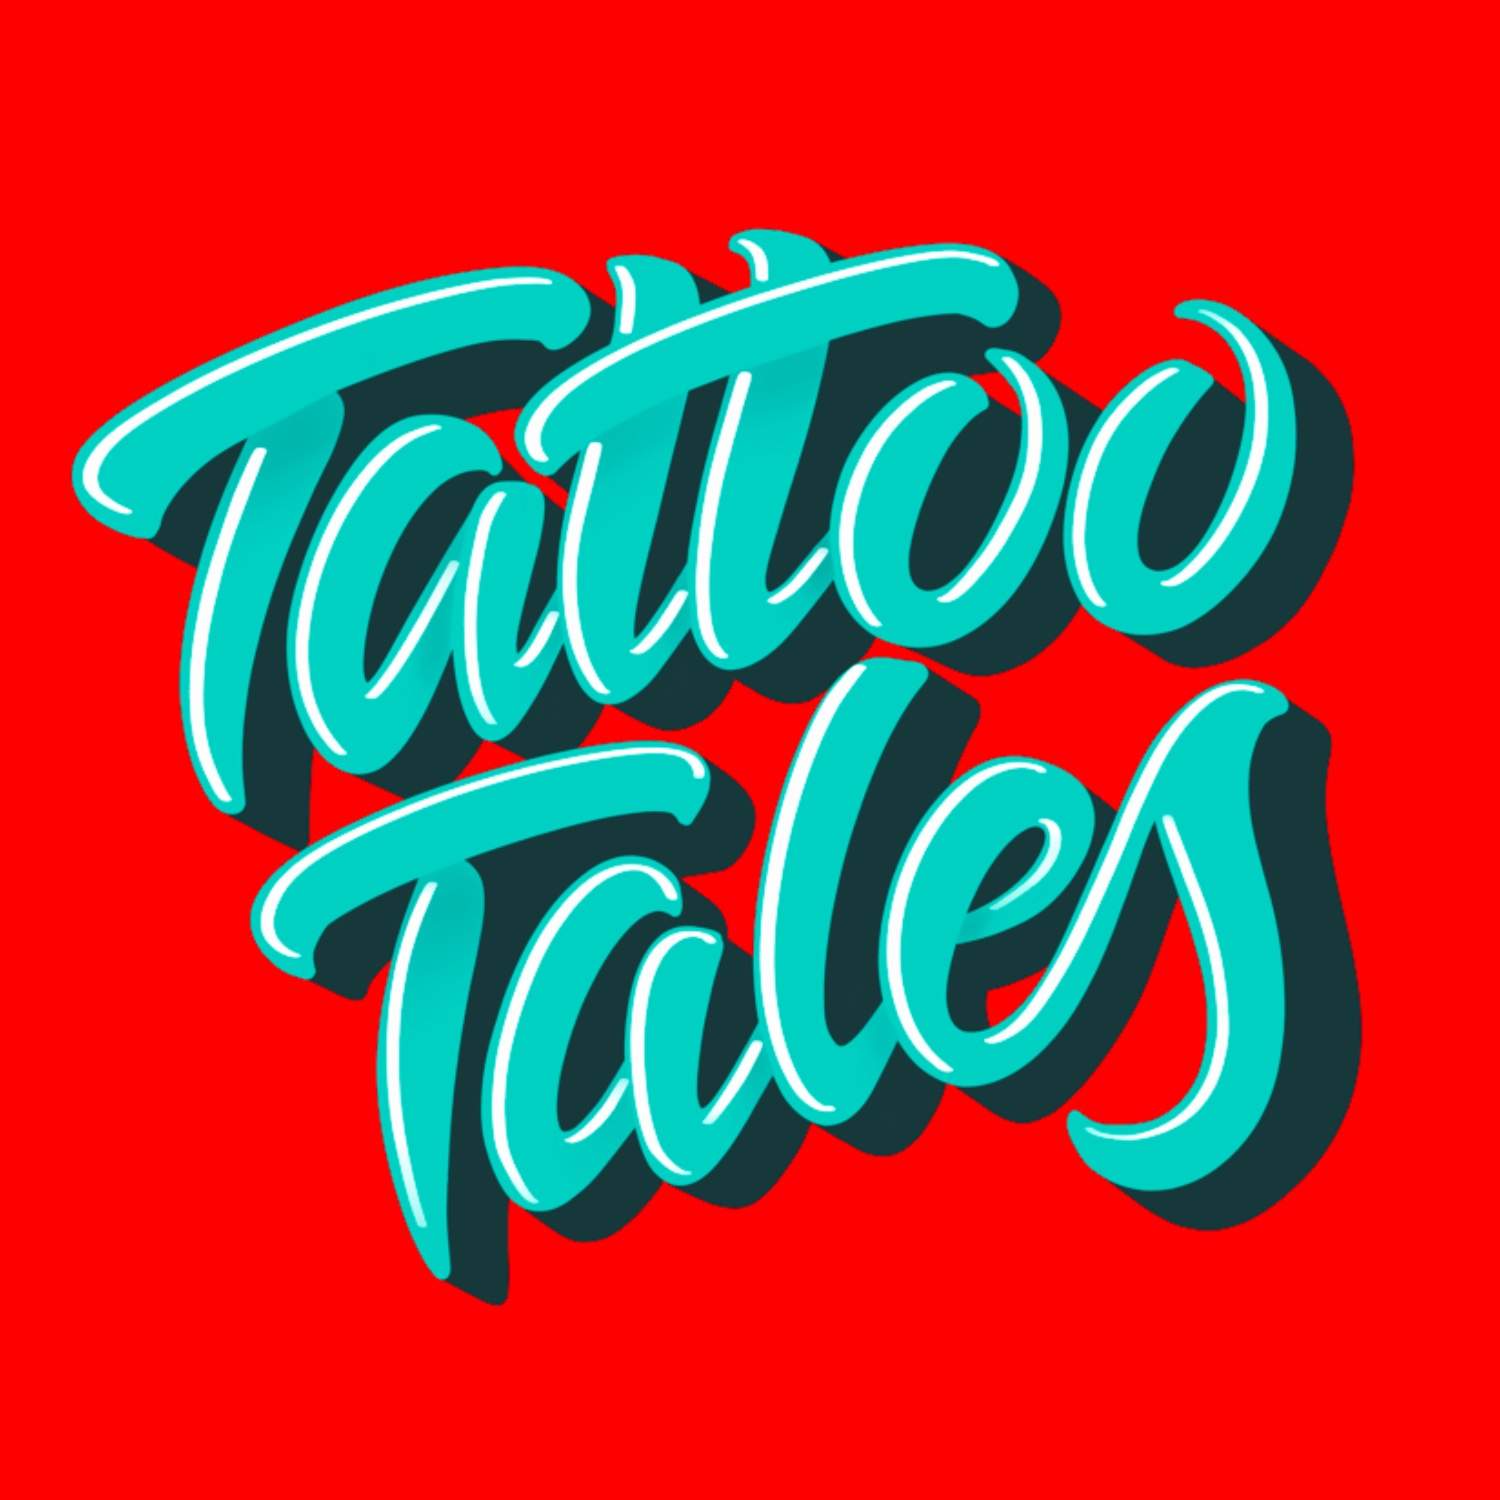 Interview with Pascal Bagot by Stef Bastian for the Tattoo Tales podcast